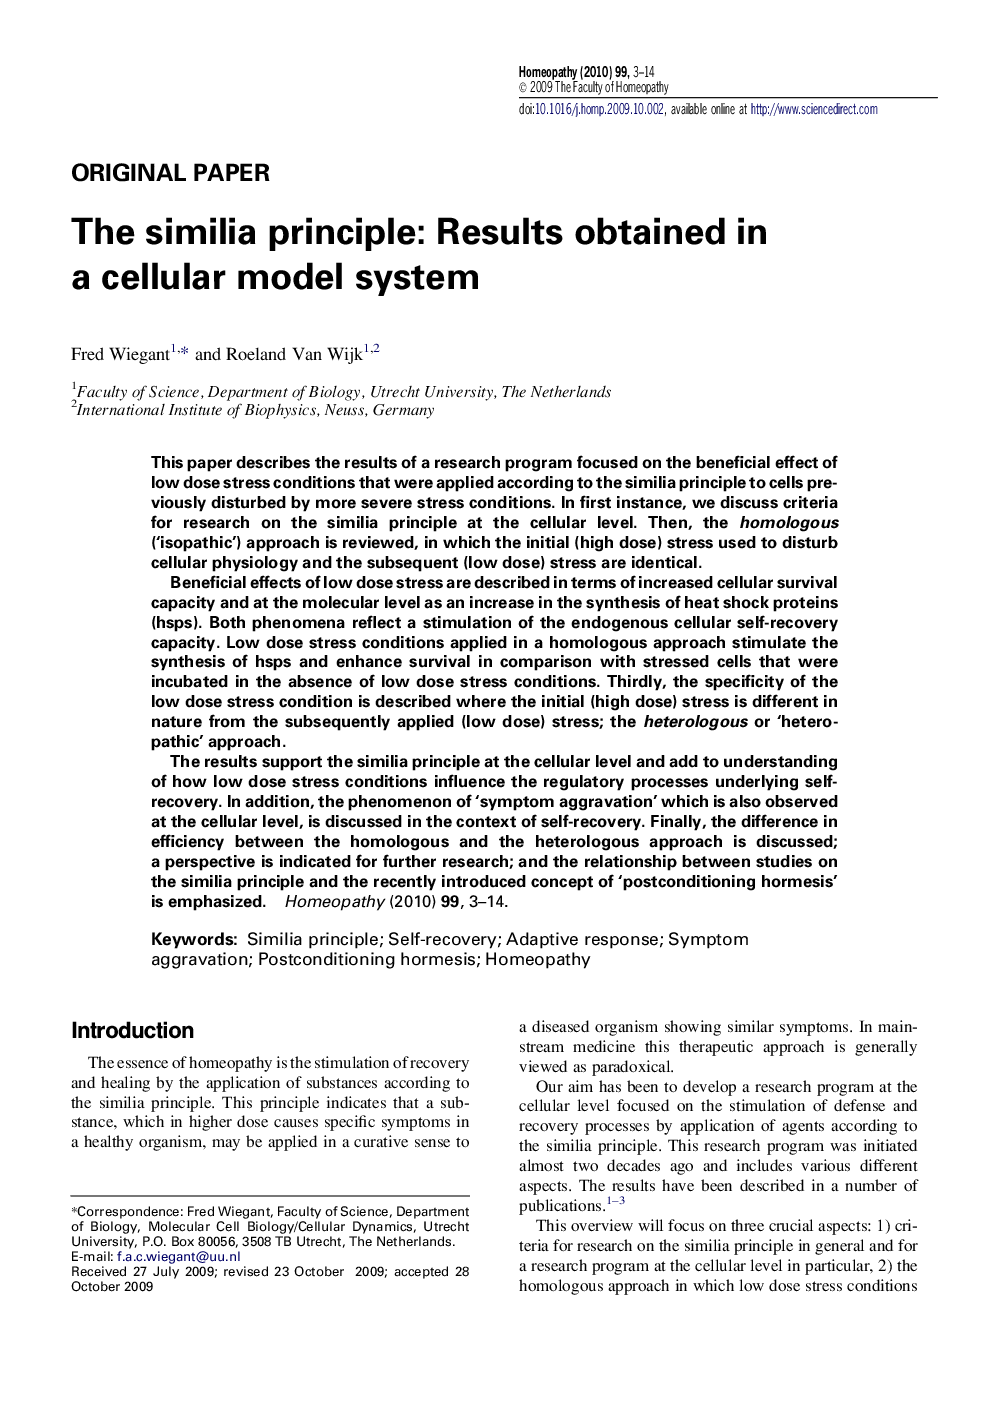 The similia principle: Results obtained in a cellular model system